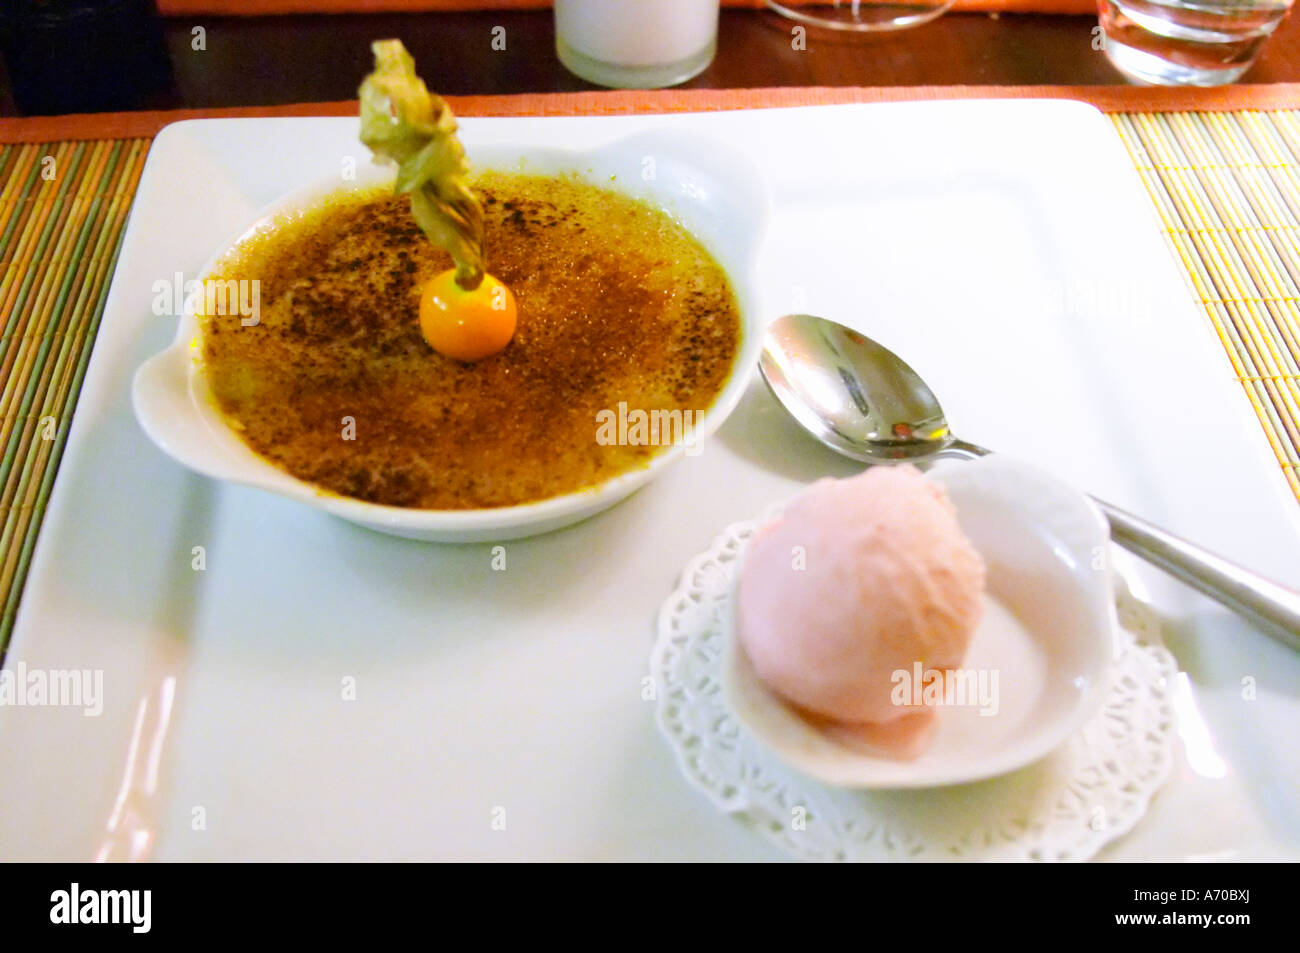 Hotel Residence in Nissan-lez-Enserune La Clape. Languedoc. Creme brulee with physalis and chewing gum flavoured ice cream. France. Europe. Stock Photo